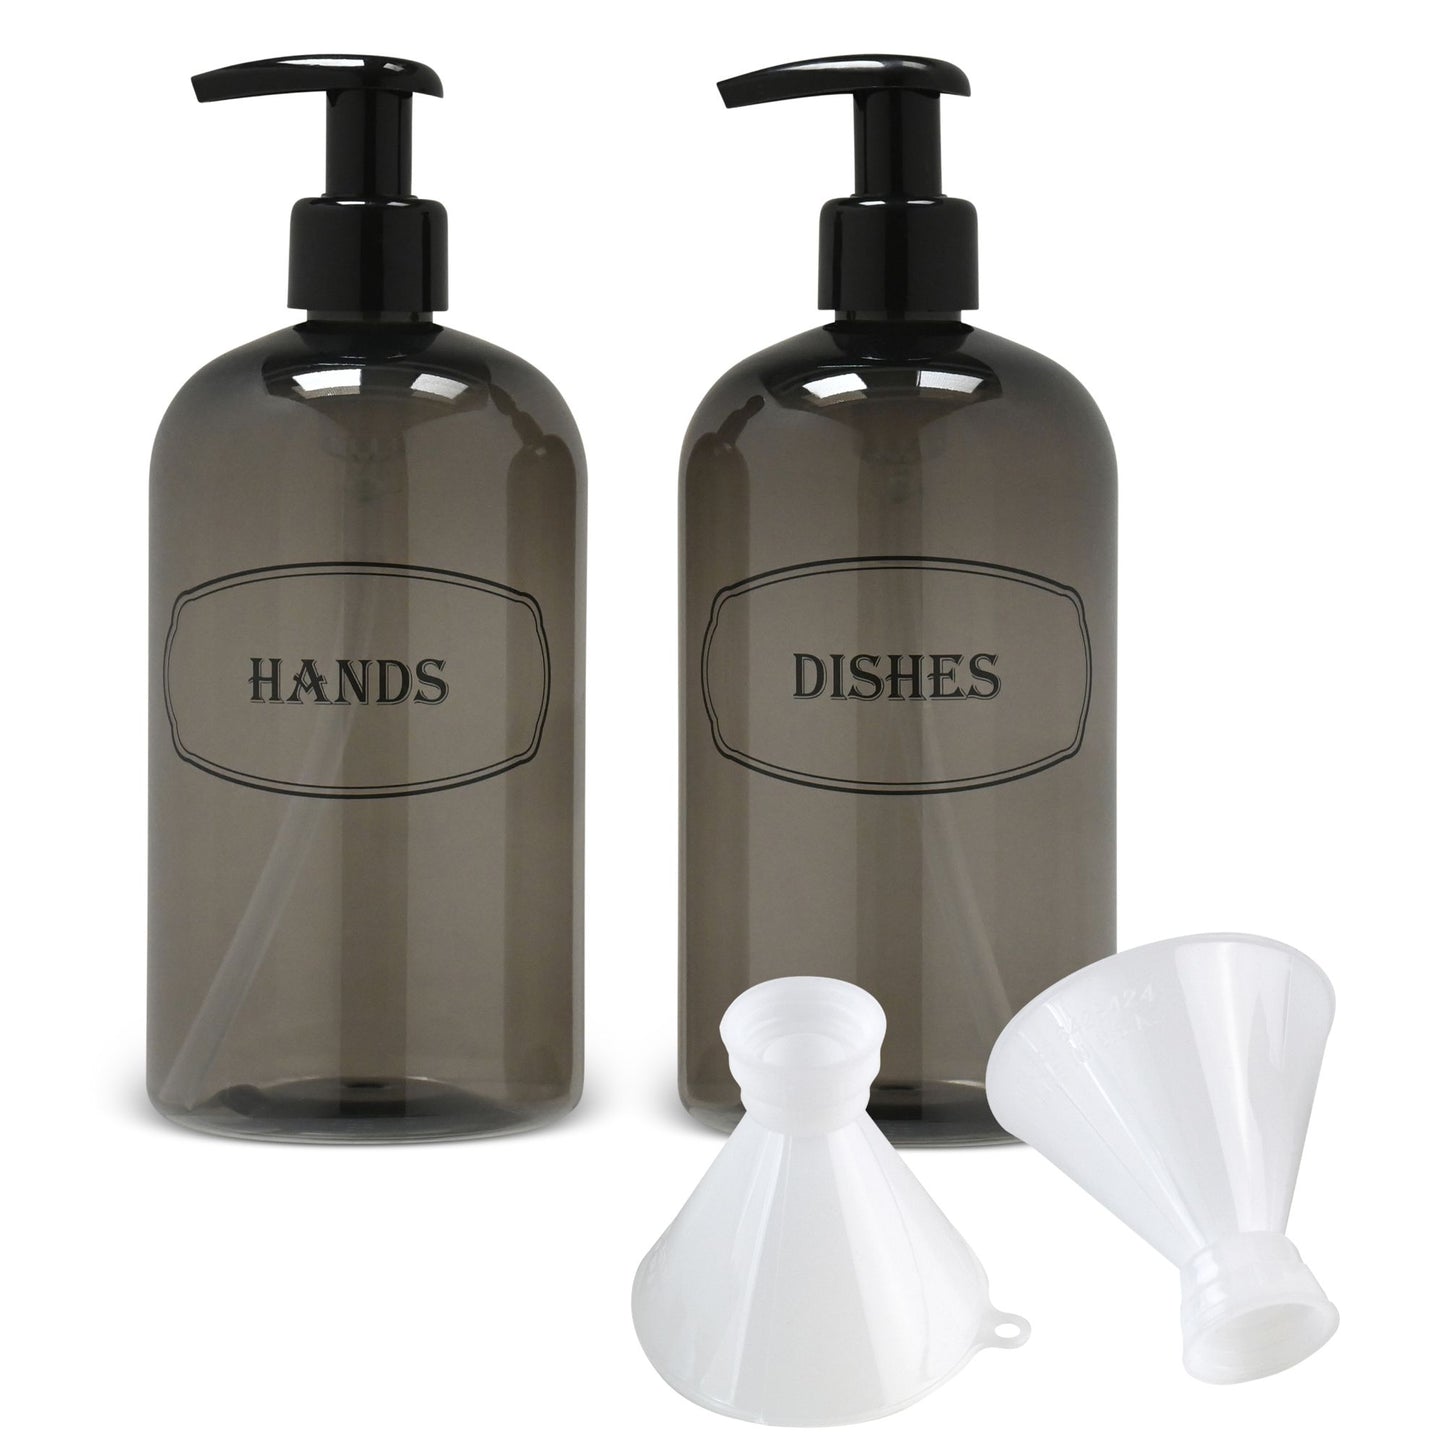 16 oz. Hands and Dishes Bottles (Any Color) PLUS 2 Twist-on Funnels Bundle